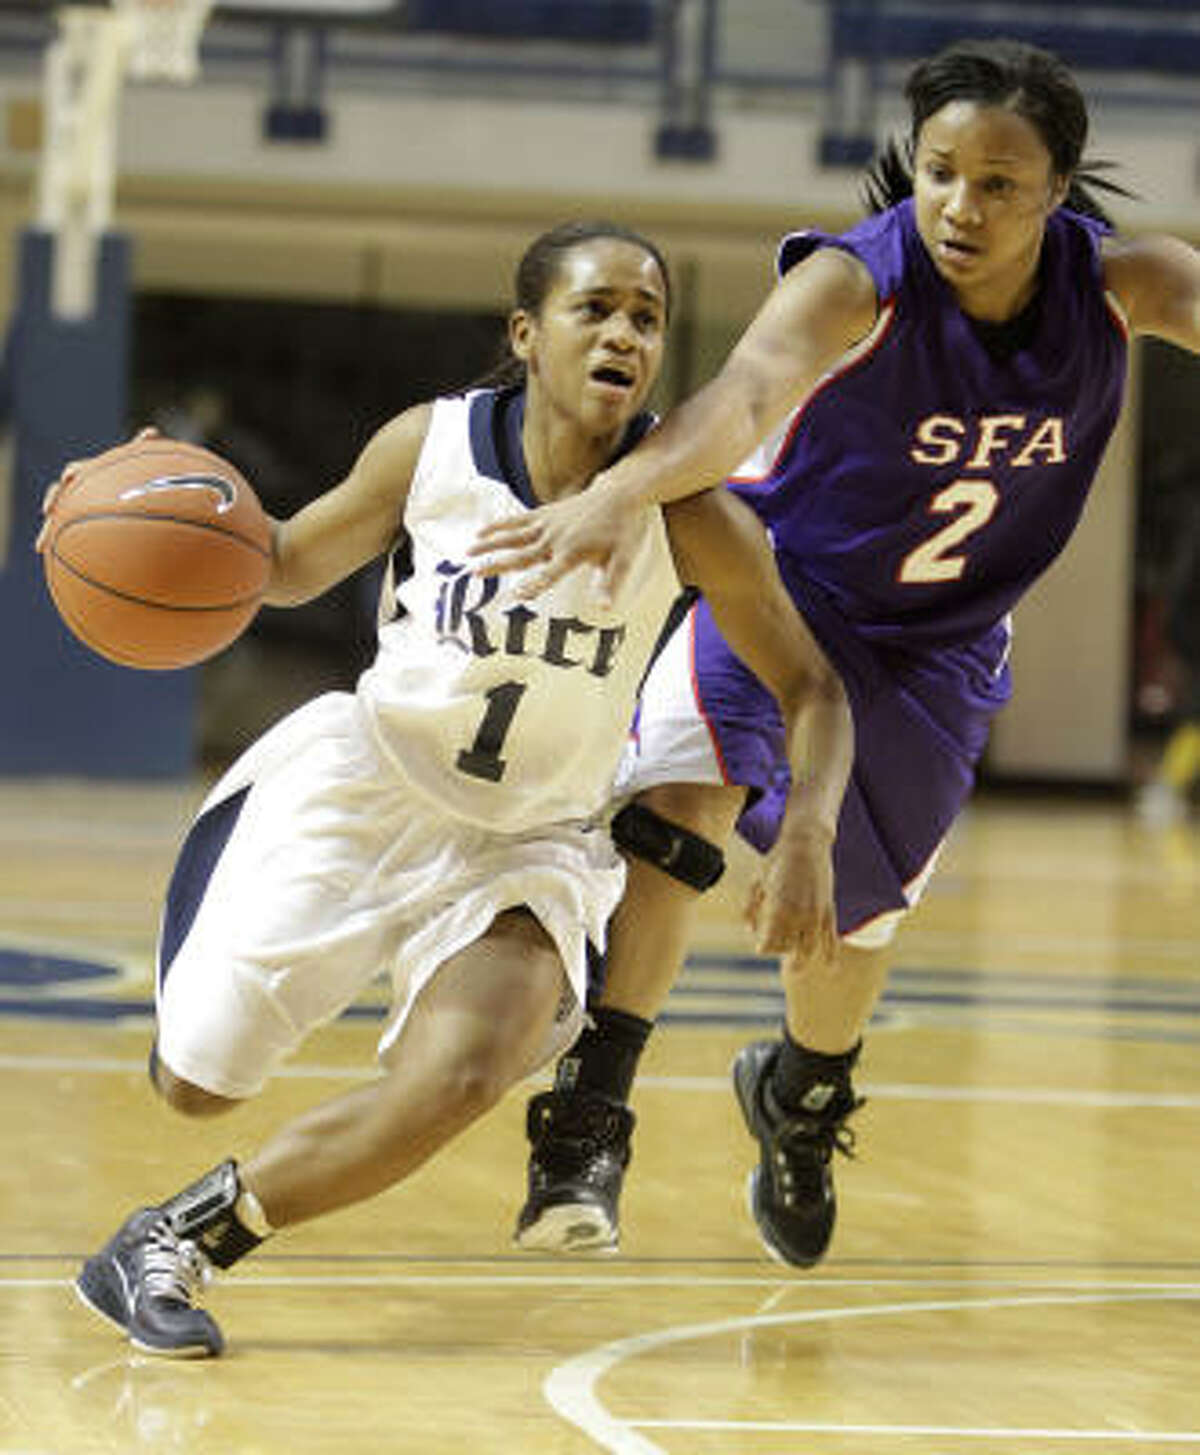 Rice's D'Frantz Smart (1) runs up the court against SFA's Courtney Conwright.